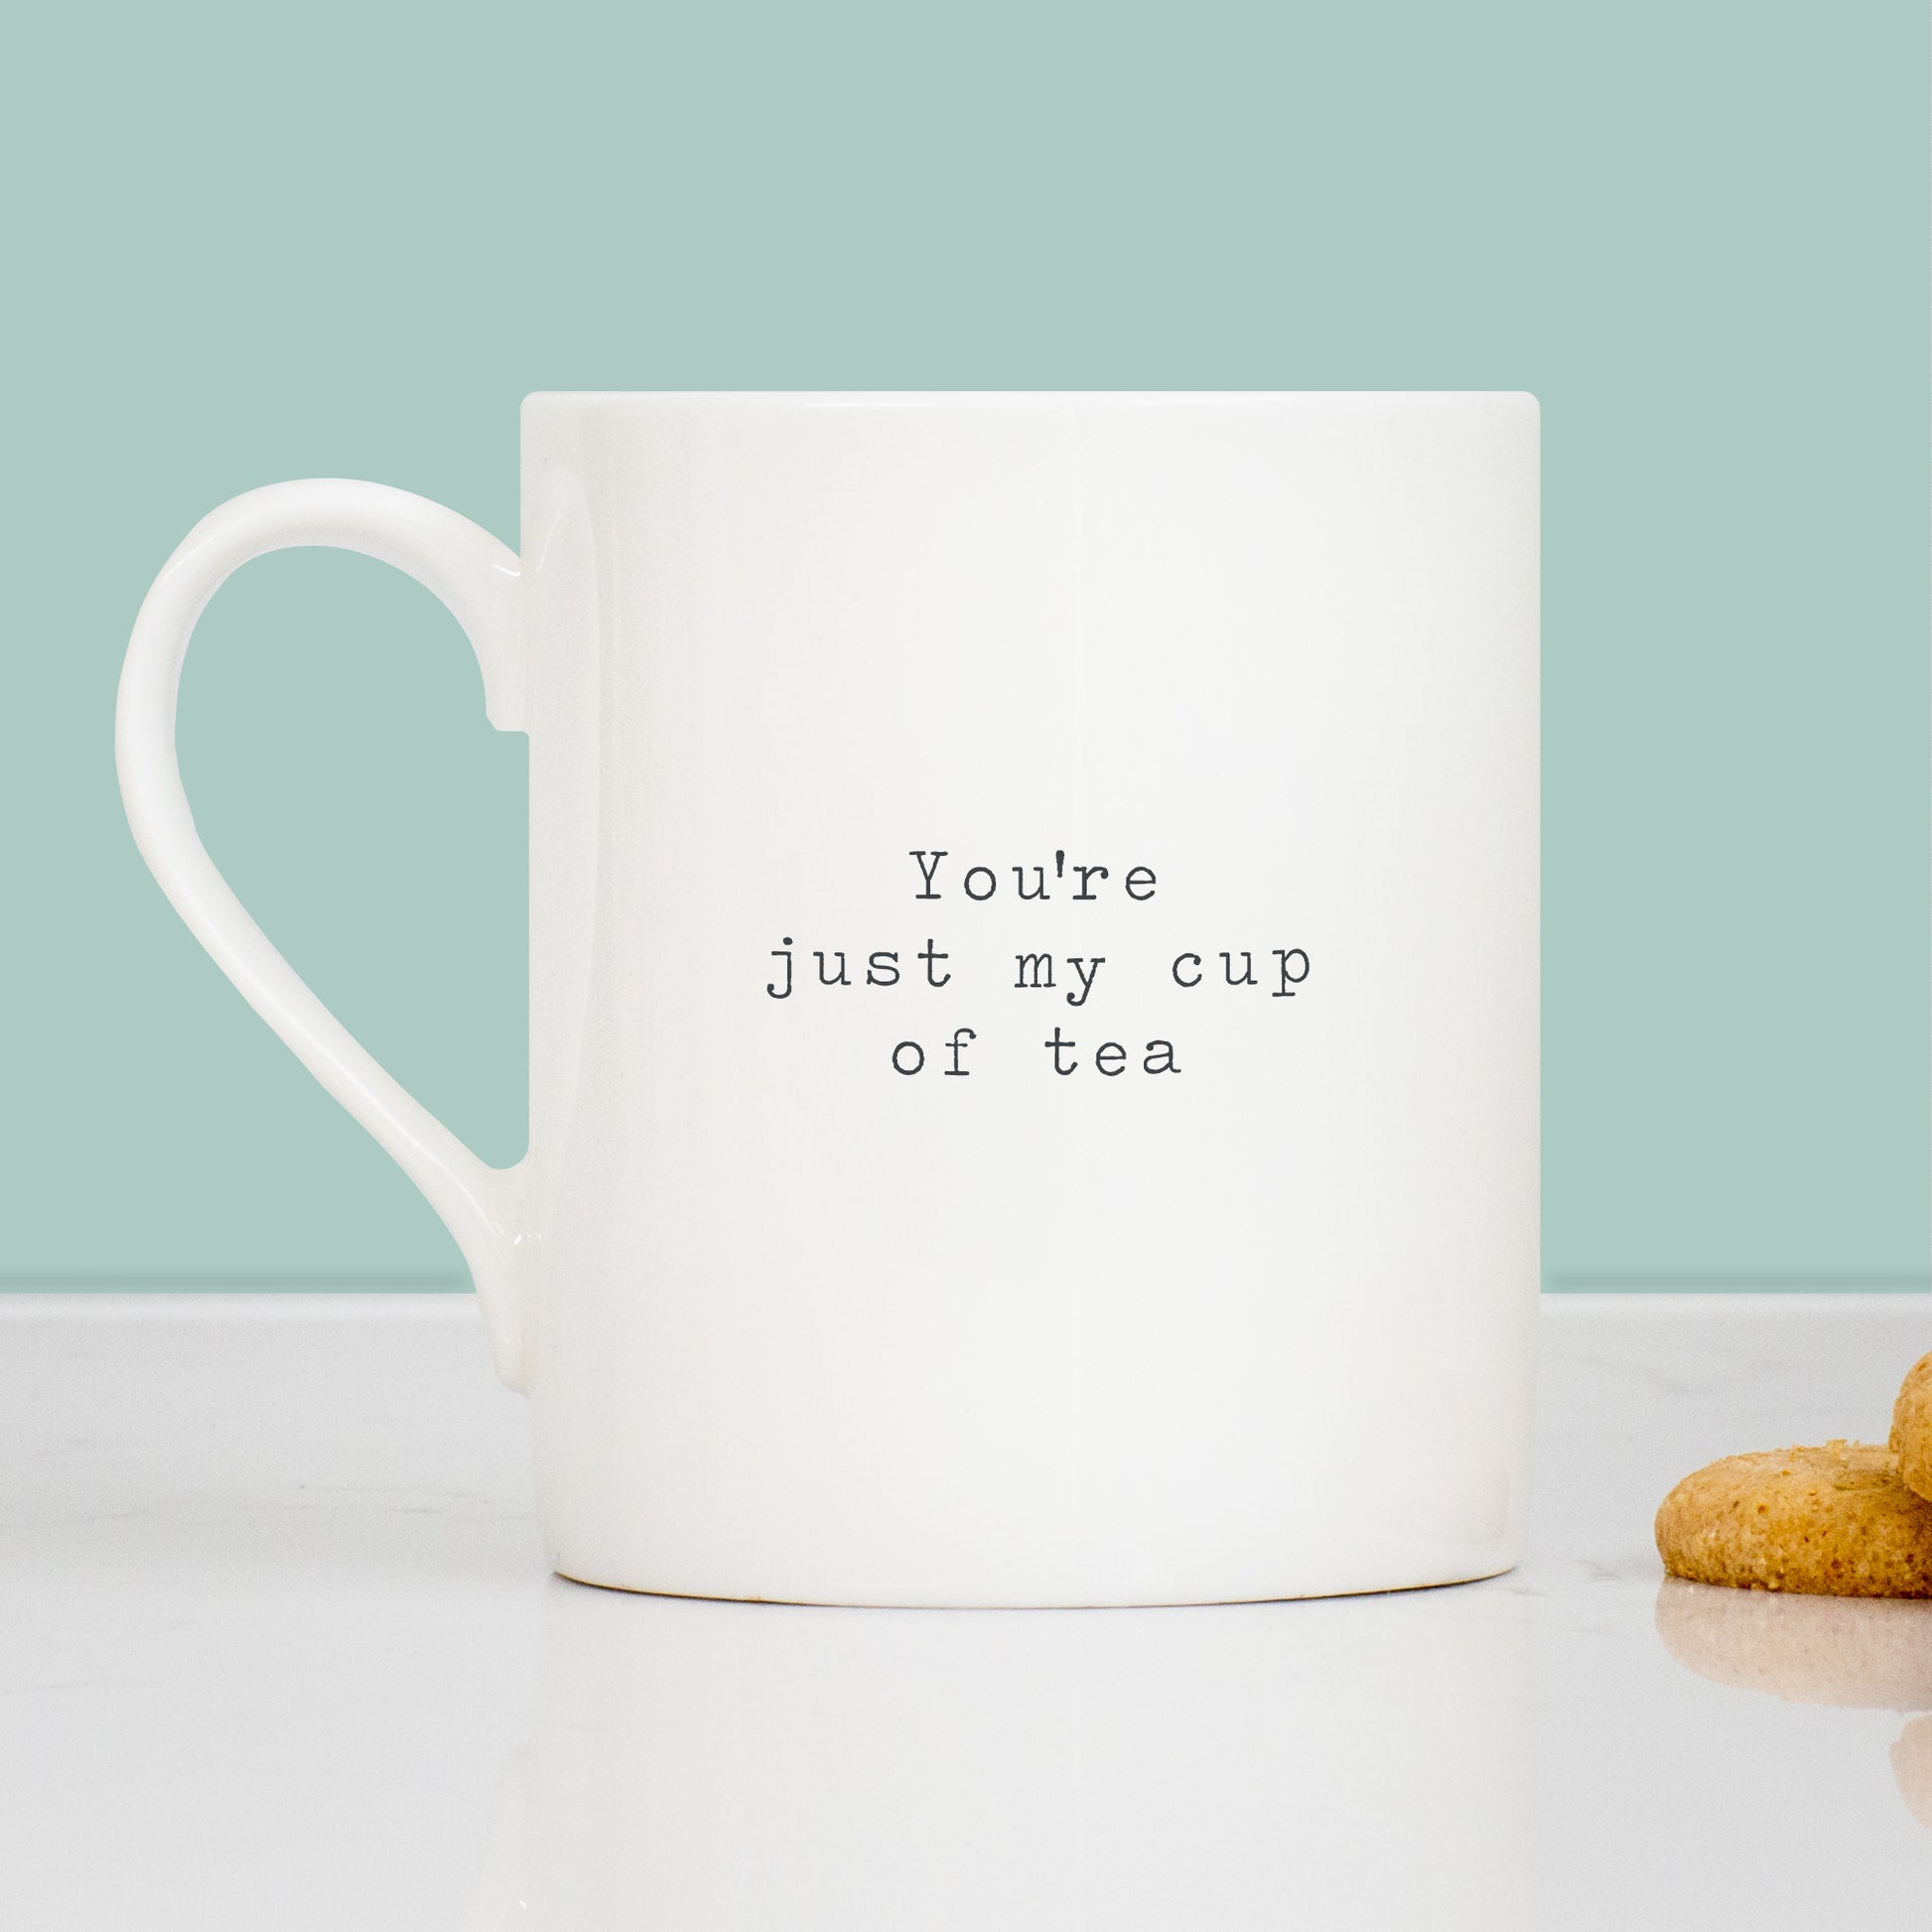 You're just my cup of tea message on china cup All images and designs © Slice of Pie Designs